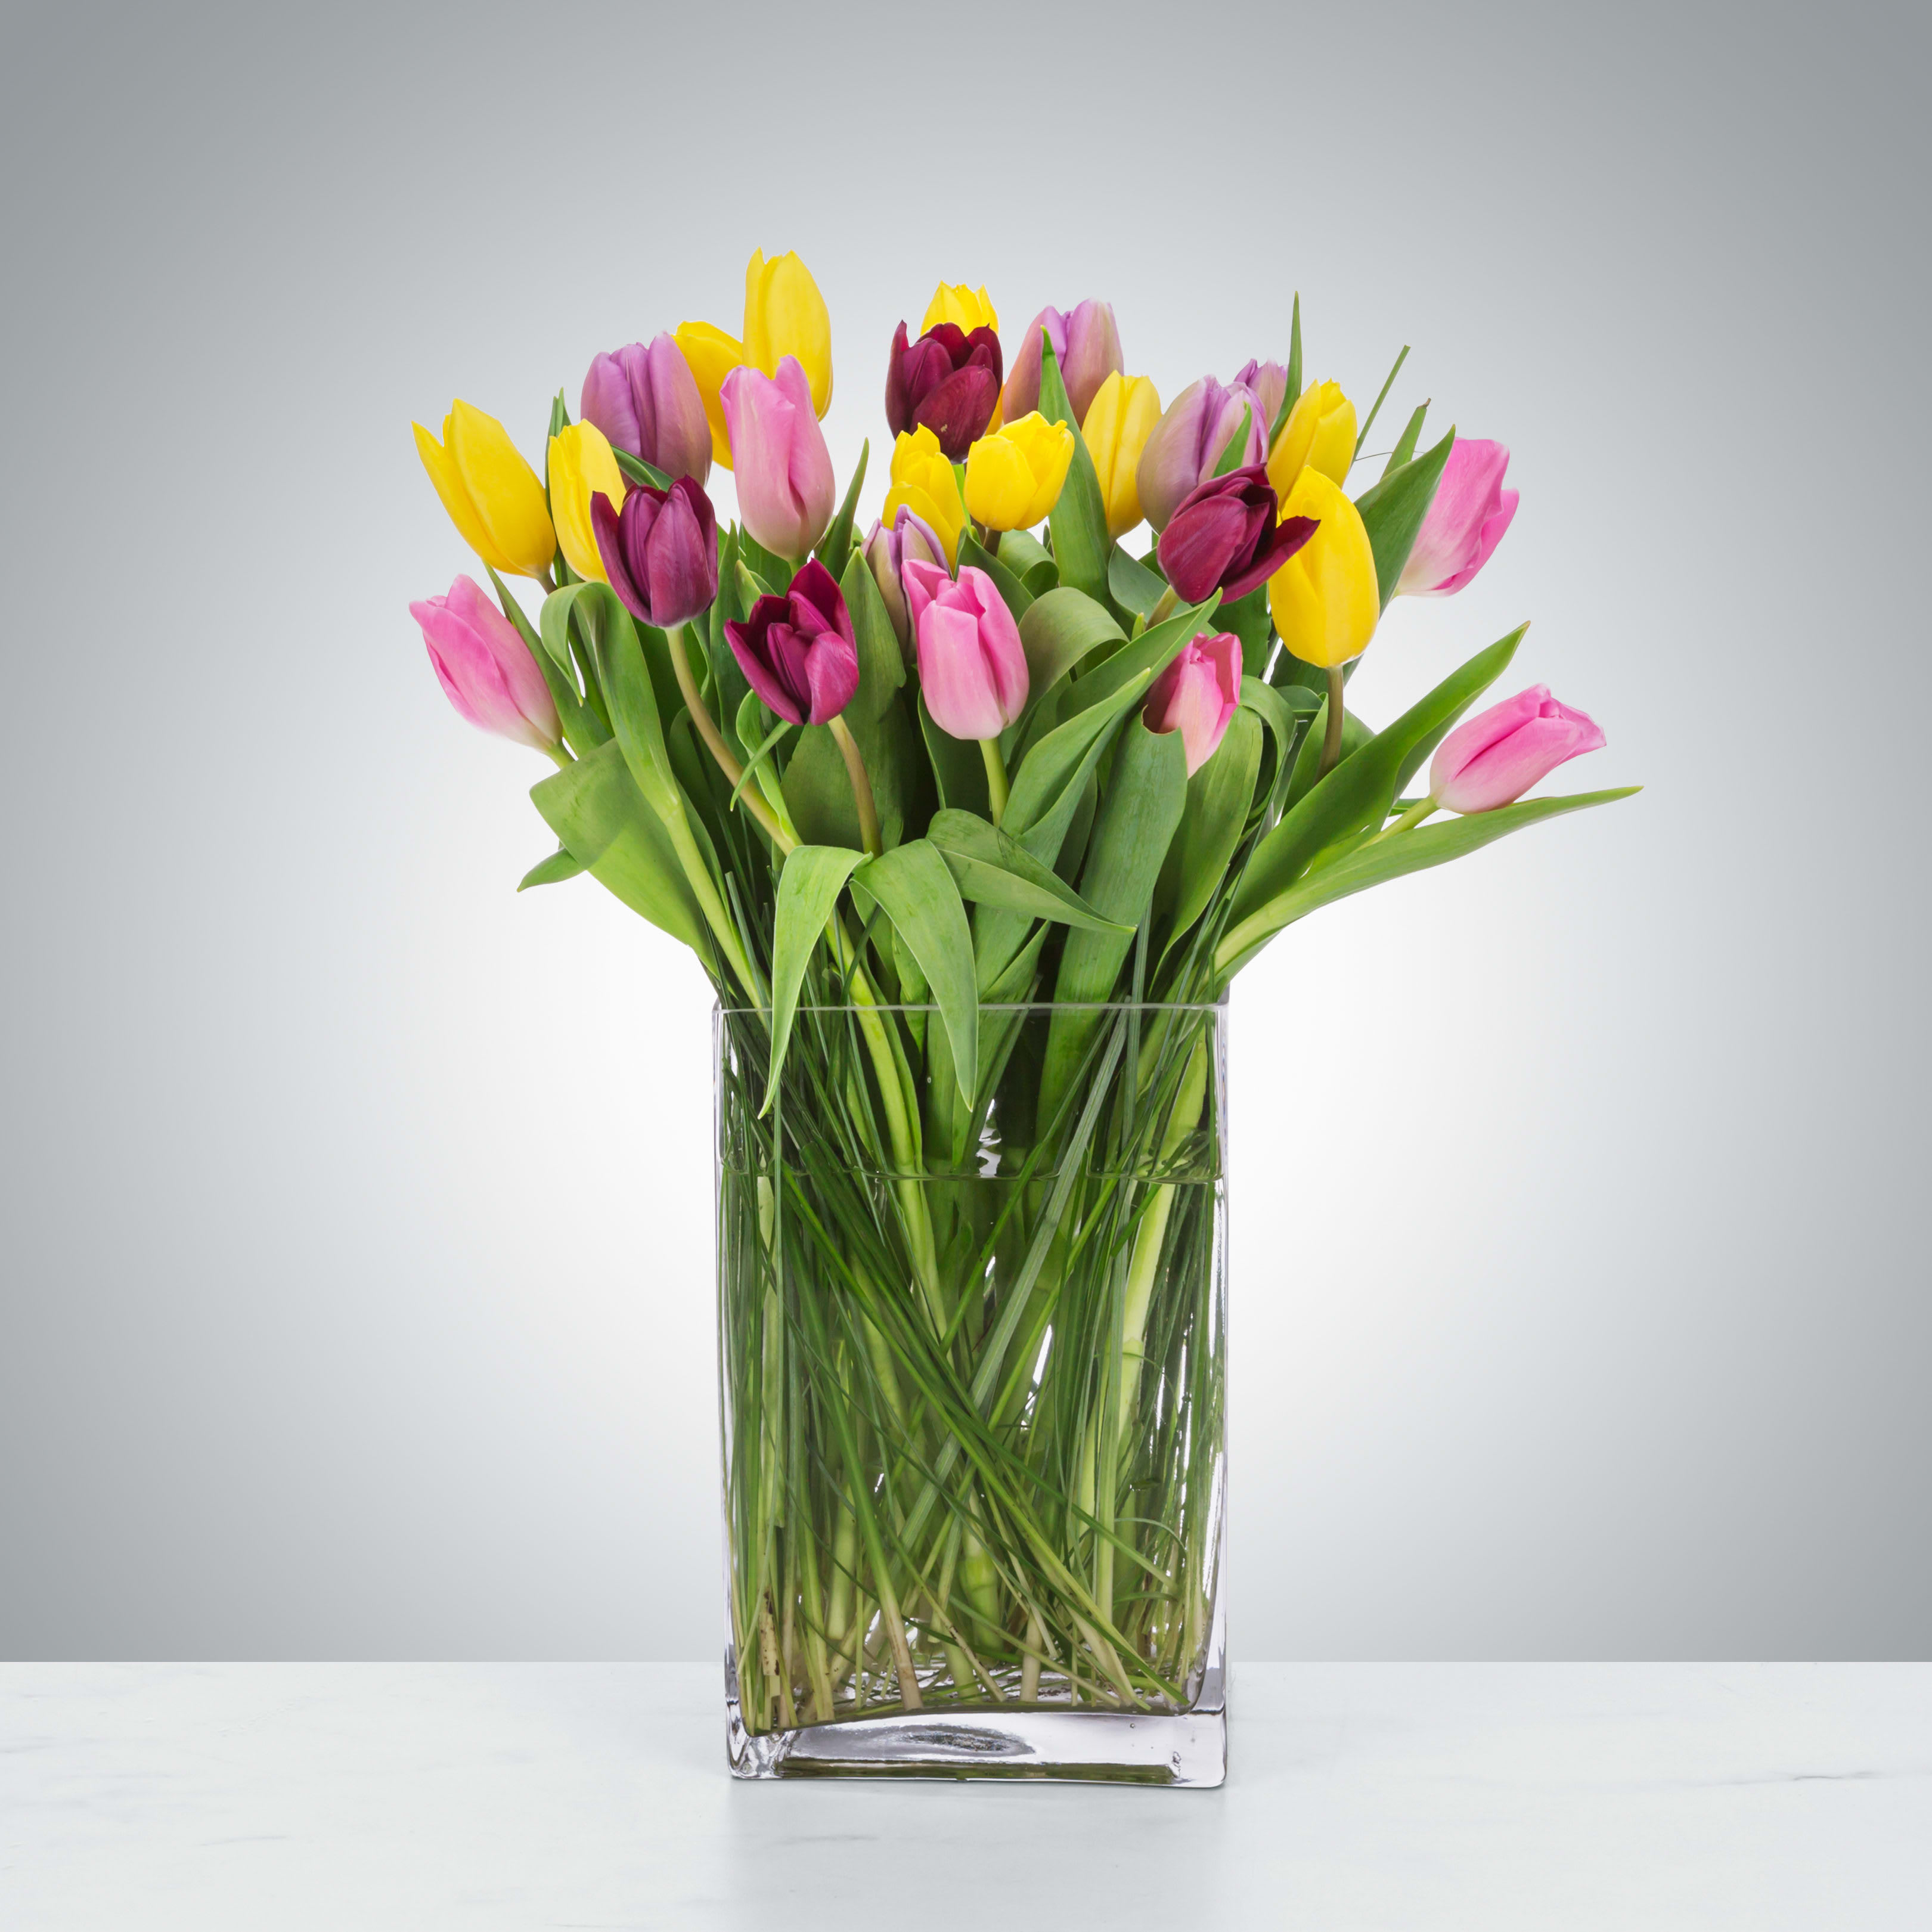 Tulip Mania - Send a selection of tulips to somebody you have unconditional love for! Always treasured and appreciated, Tulips have a rich history and are loved by all making them a fan favorite for Mother's Day. They also are a great option for celebrating an anniversary or just because.  1st Image: Standard 2nd Image: Premium